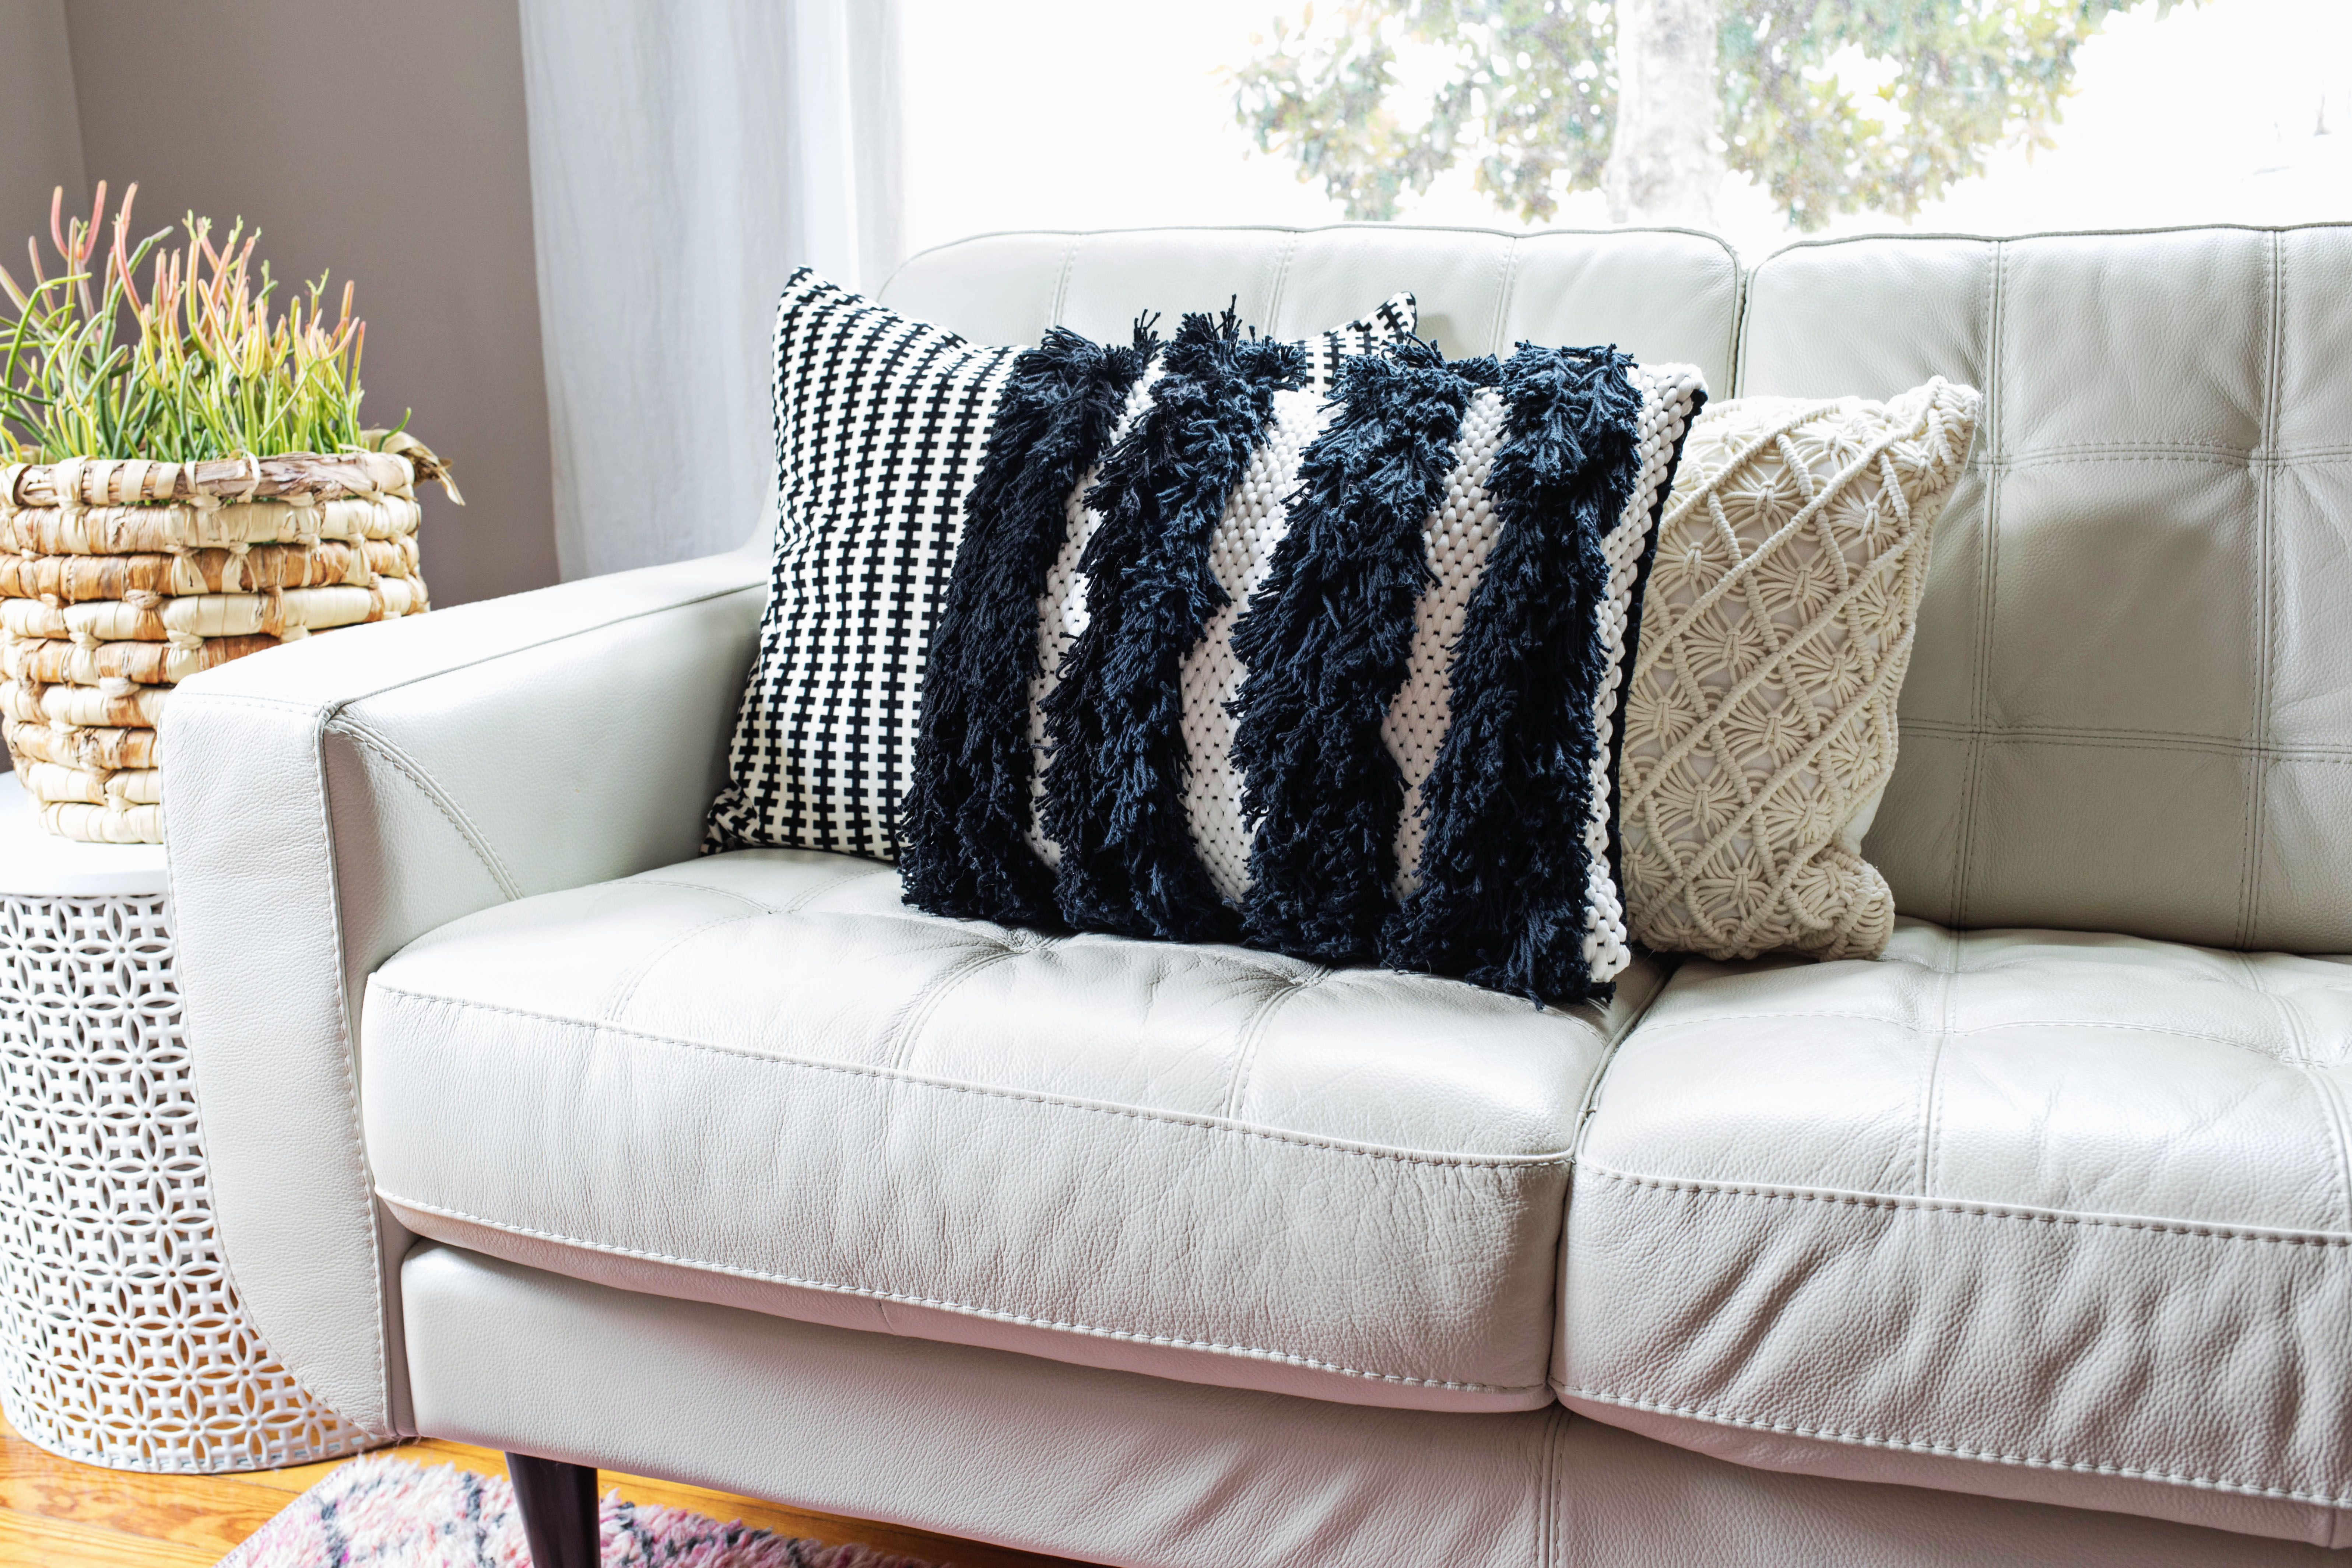 DIY black and white woven pillow with fringe